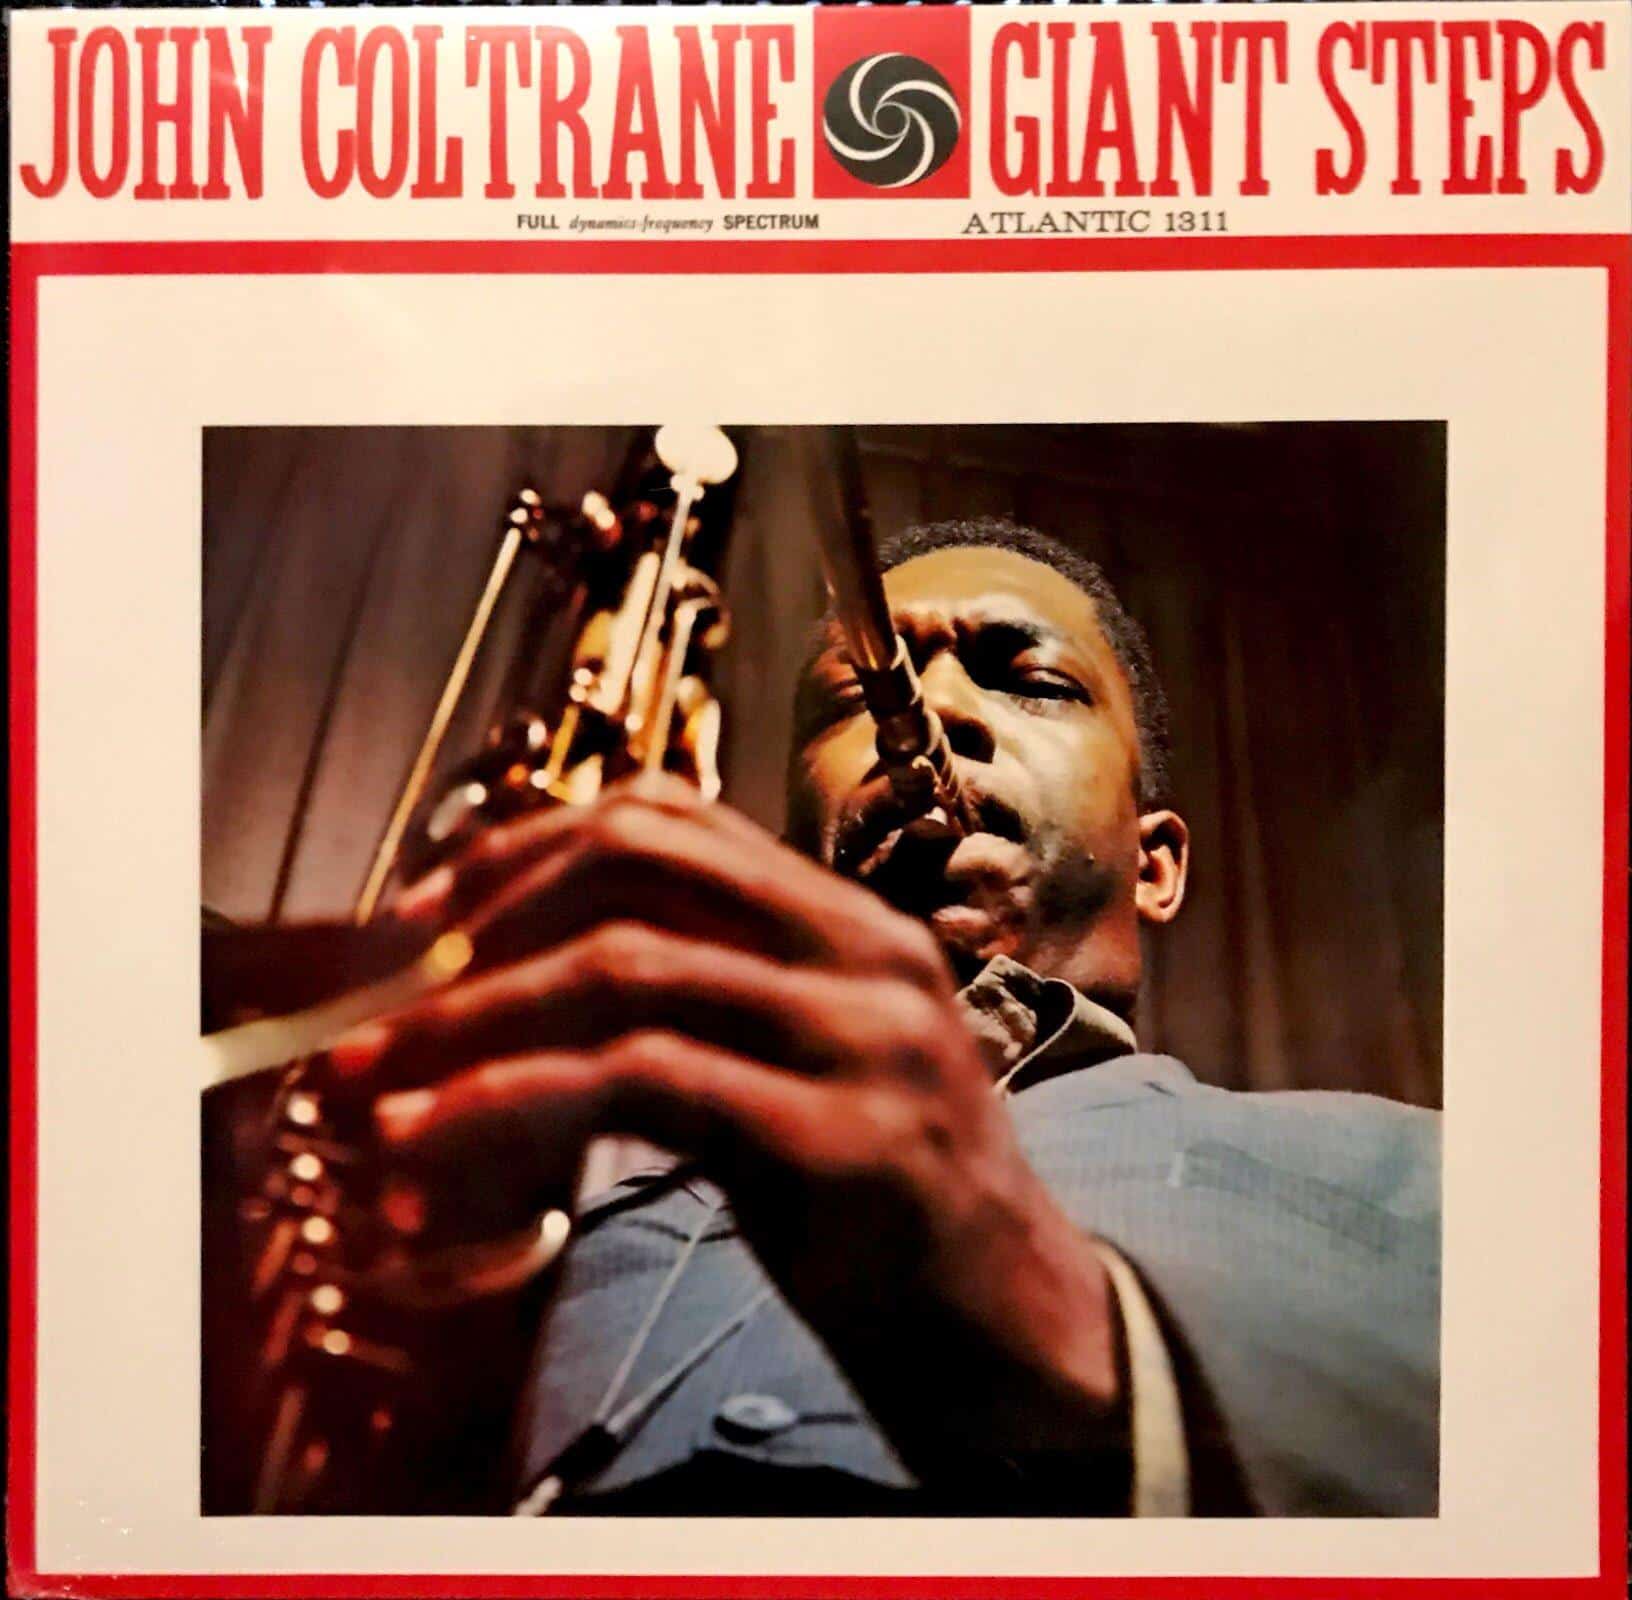 Cover image of John Coltrane’s album, Giant Steps [Credit: Ged Carroll, CC 2.0]